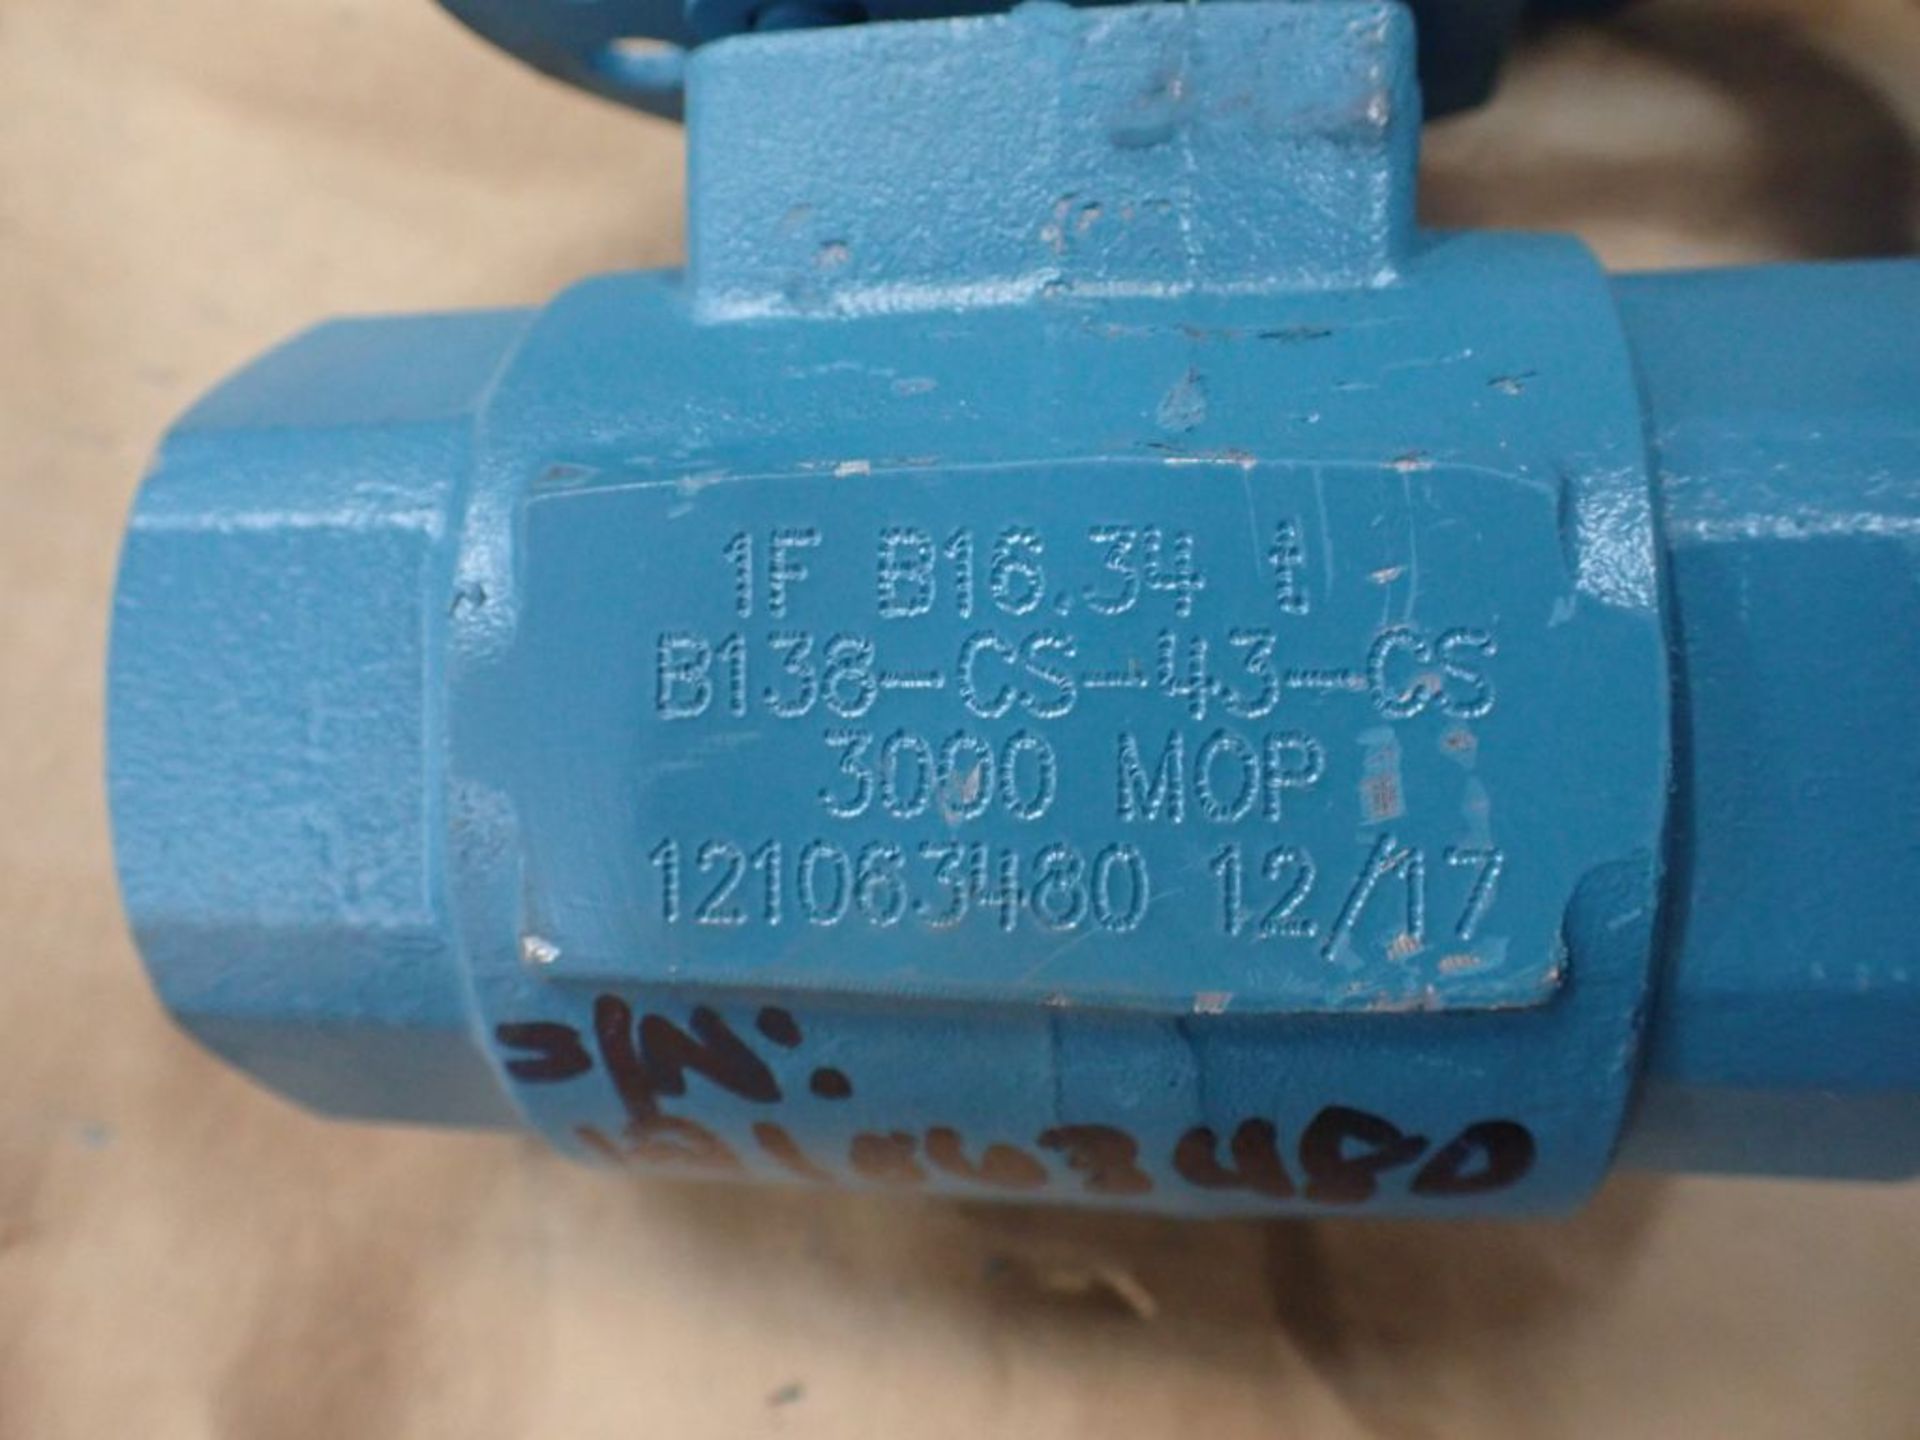 Lot of (22) Dynaseal Valves - Serial No. 12107813; 3000 MOP - Image 8 of 11